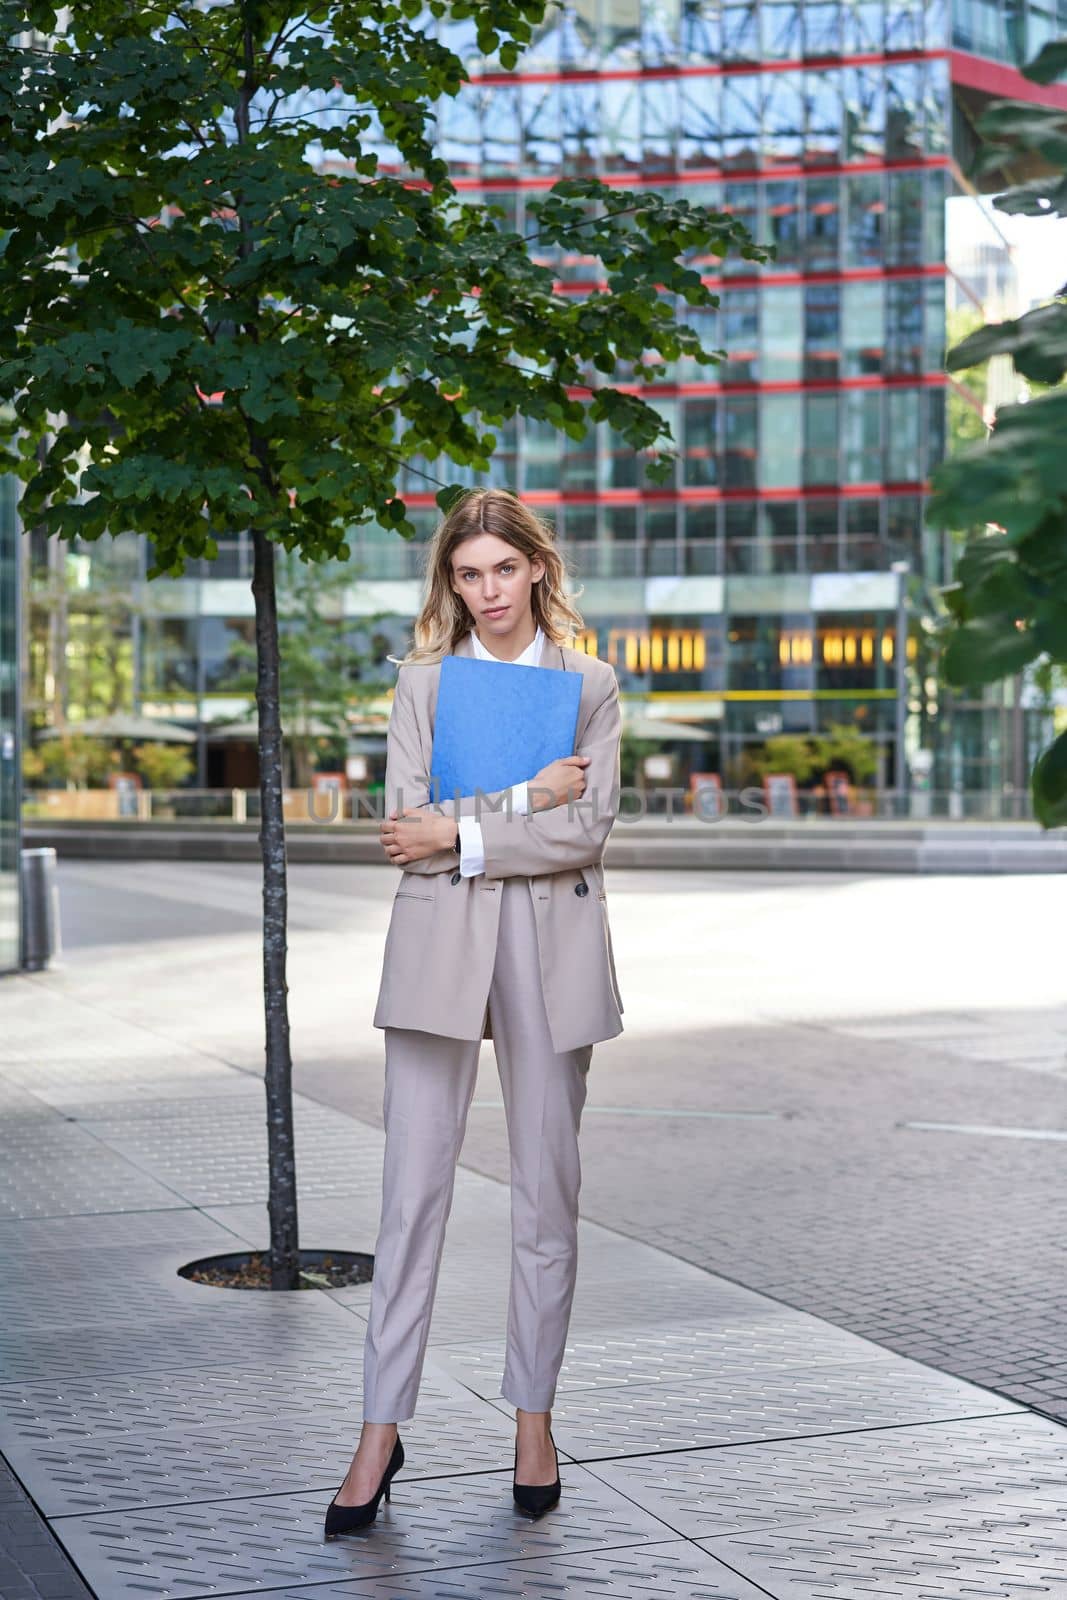 Vertical shot of young businesswoman in beige suit, holding documents in hands, looking confident at camera, standing outdoors in city.